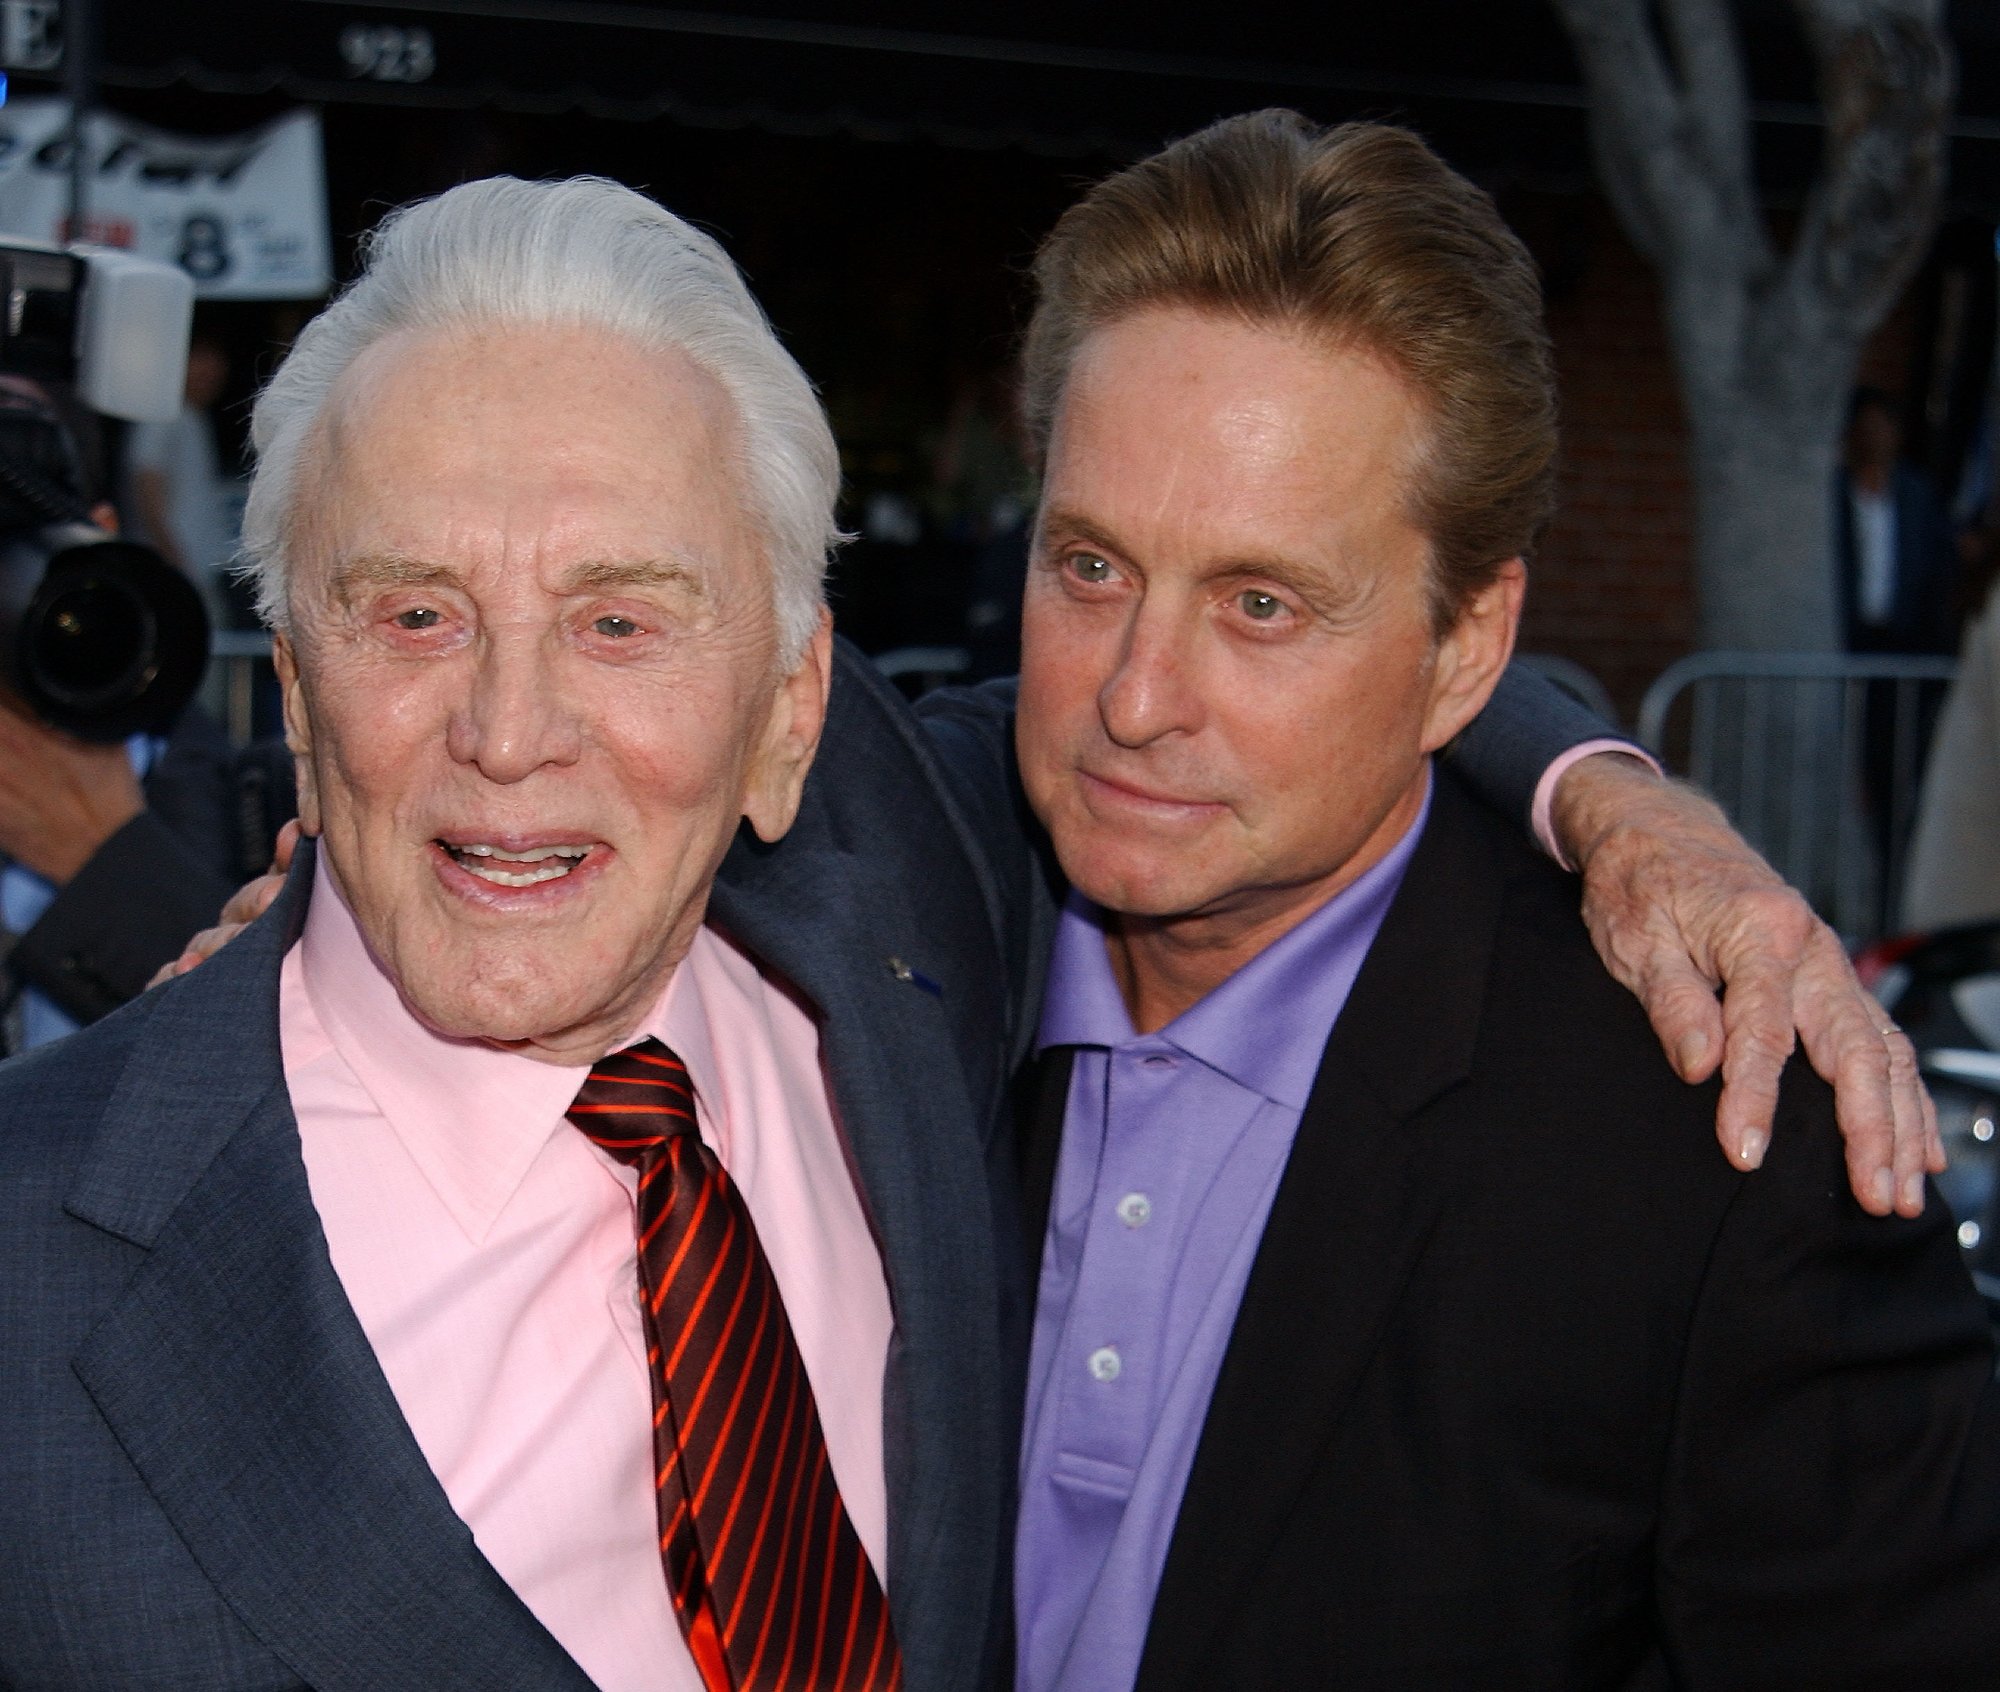 'One Flew Over the Cuckoo's Nest' Kirk Douglas and Michael Douglas. Kirk has his arm around Michael with them both wearing suits.